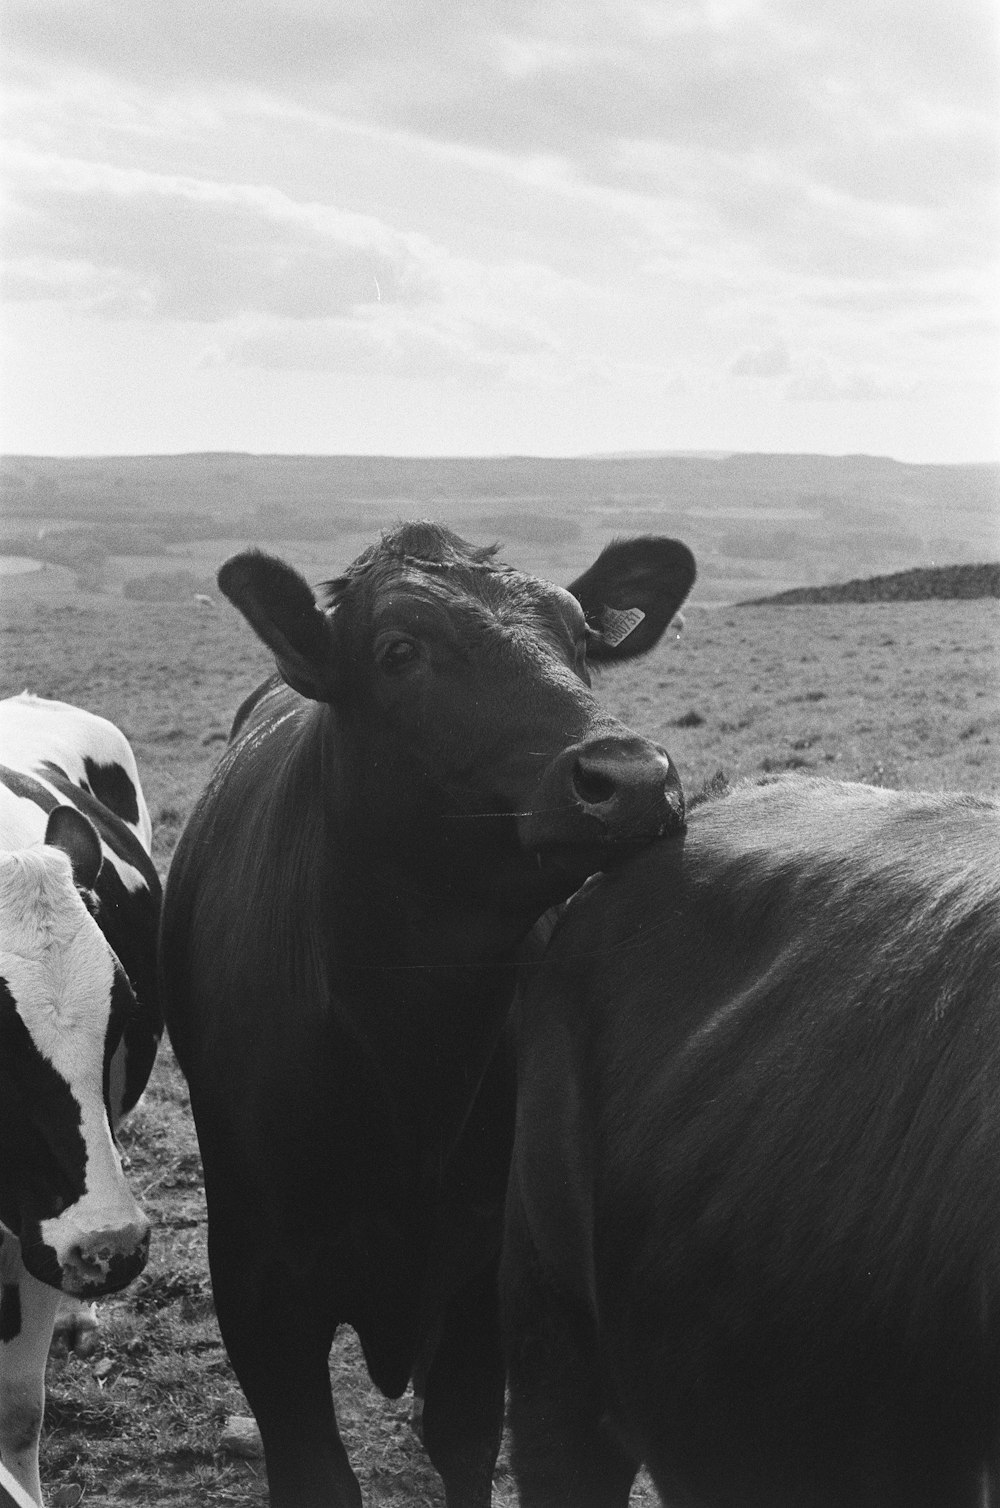 two cows standing next to each other in a field